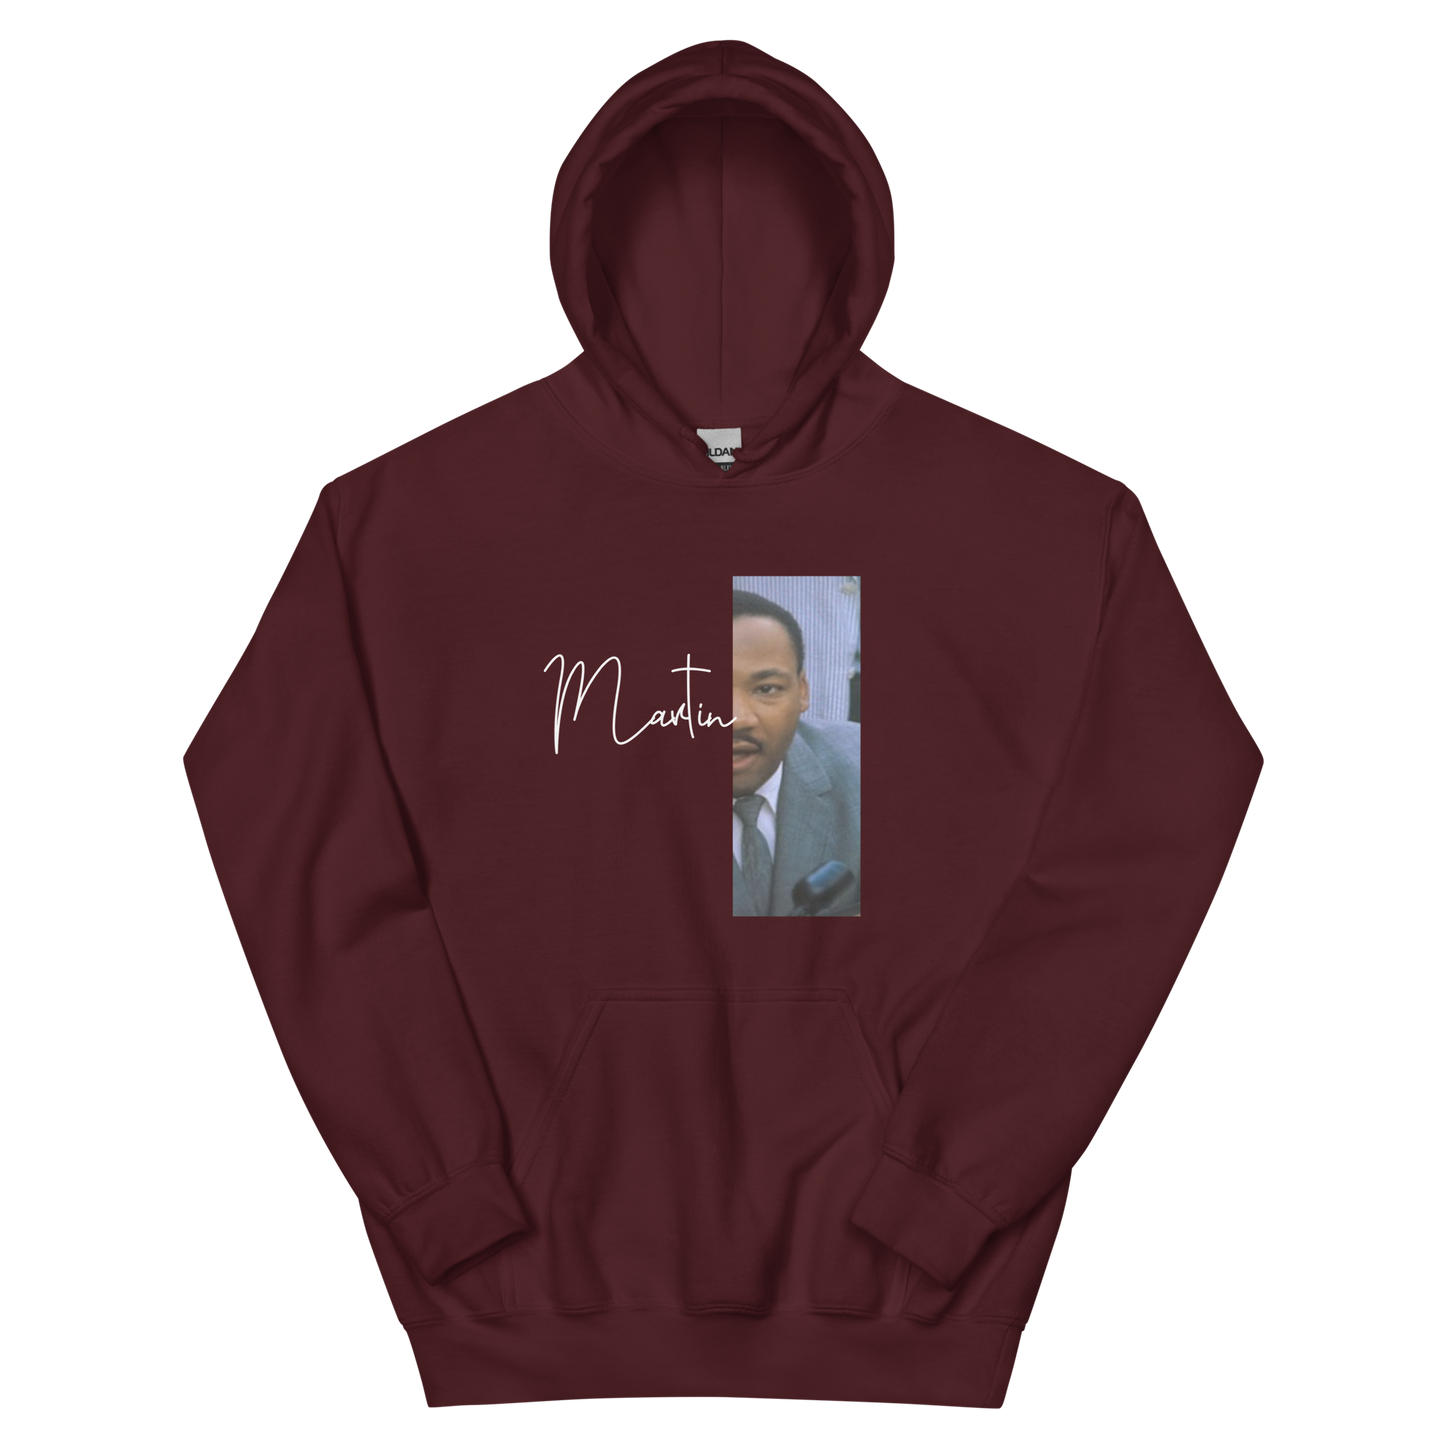 Martin Luther King Jr. Hoodie